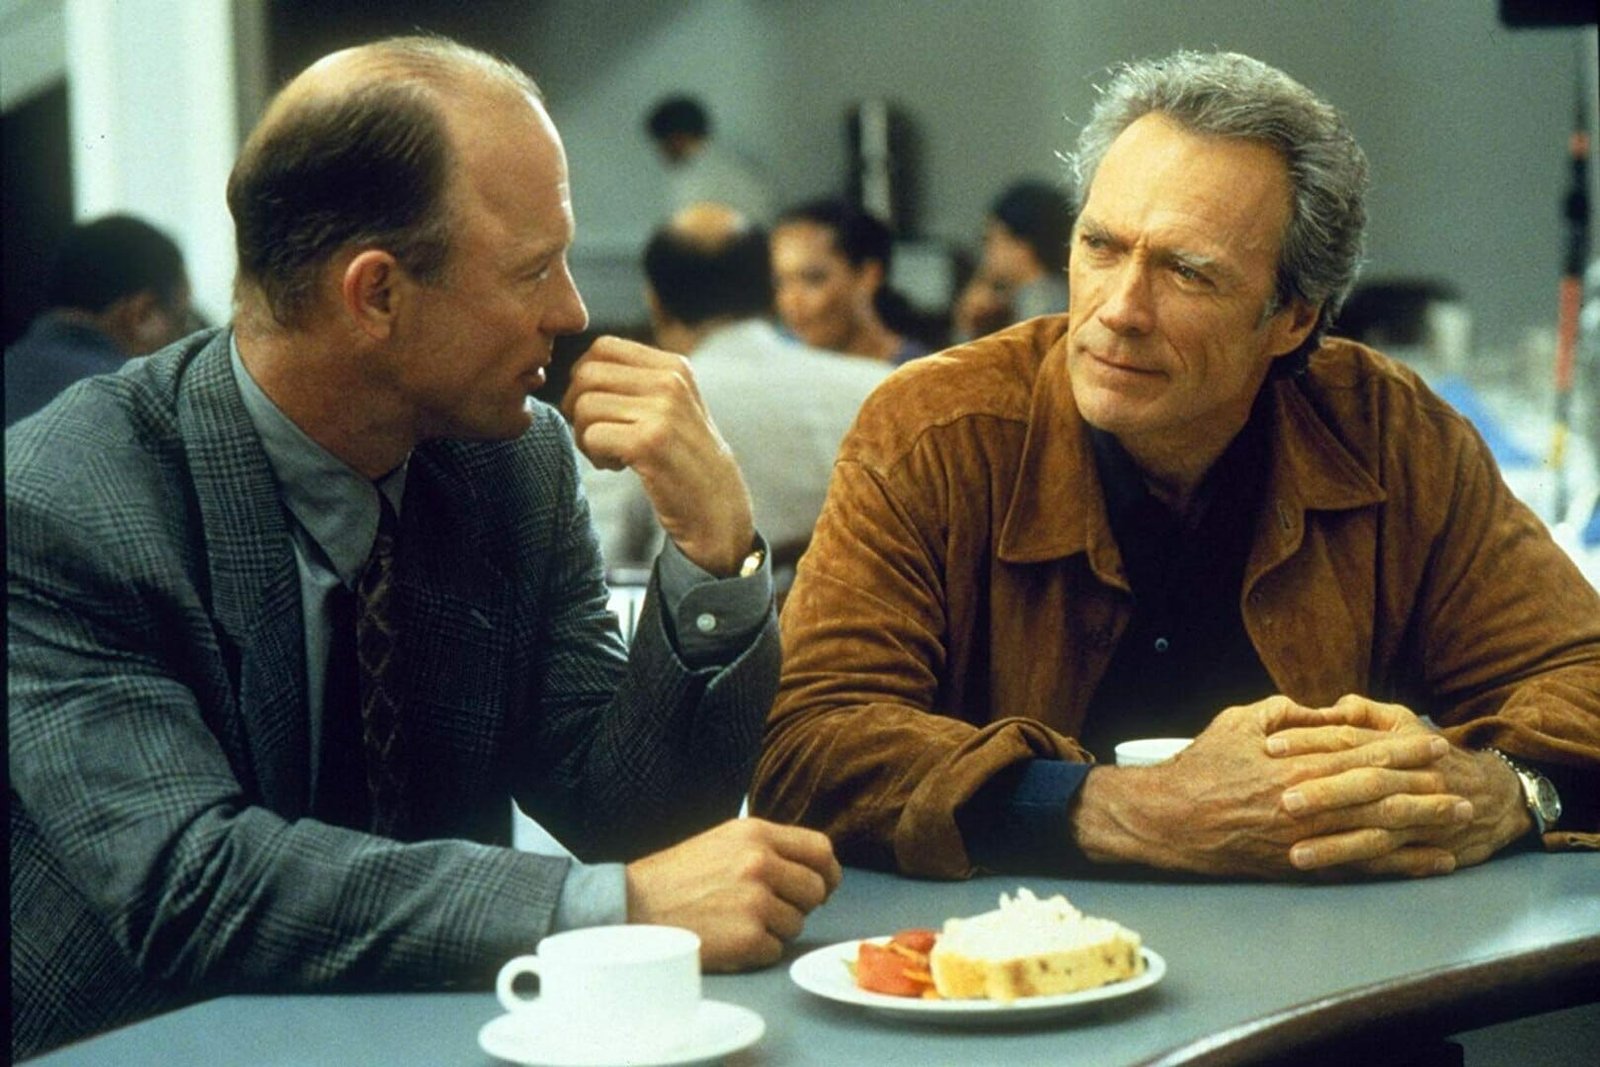 Best Clint Eastwood movies: Absolute power (1997)